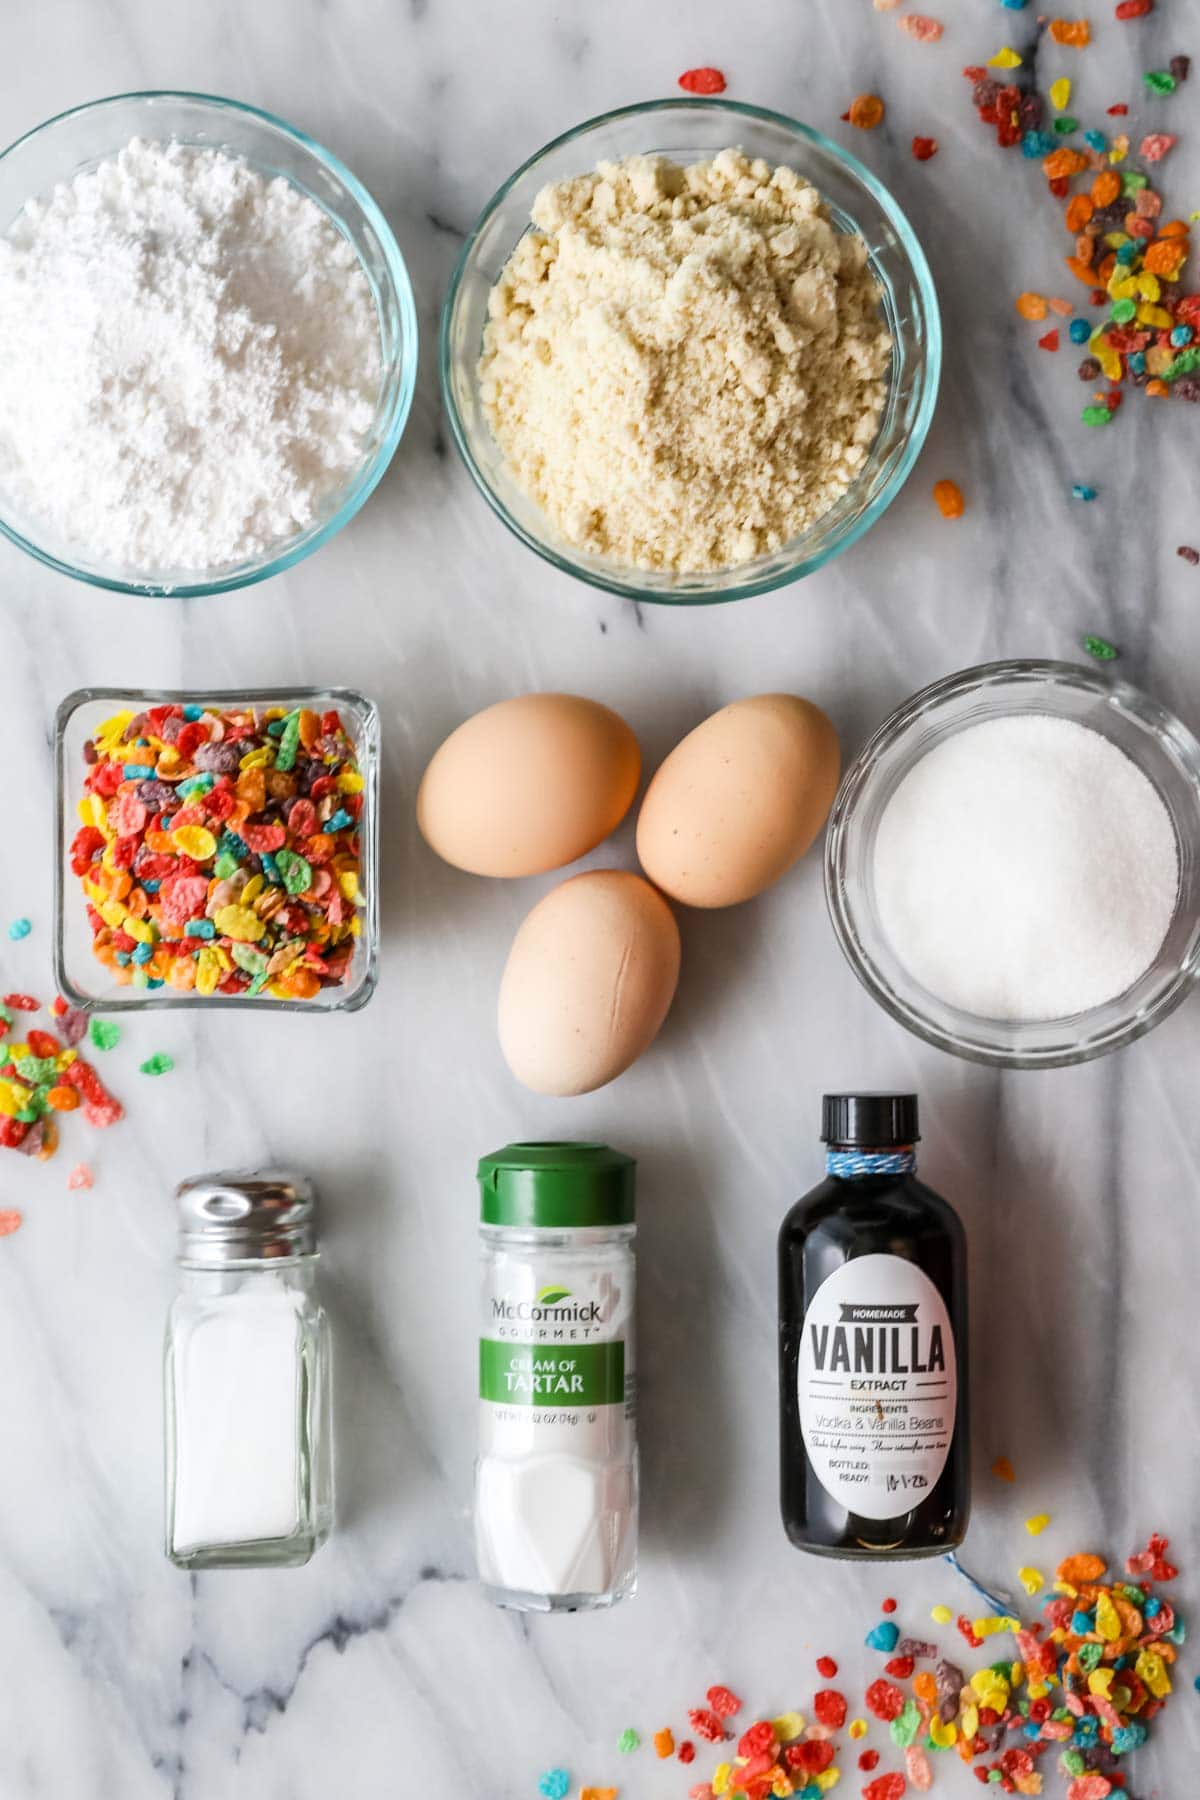 Overhead view of ingredients including fruity pebbles, almond flour, eggs, and more.